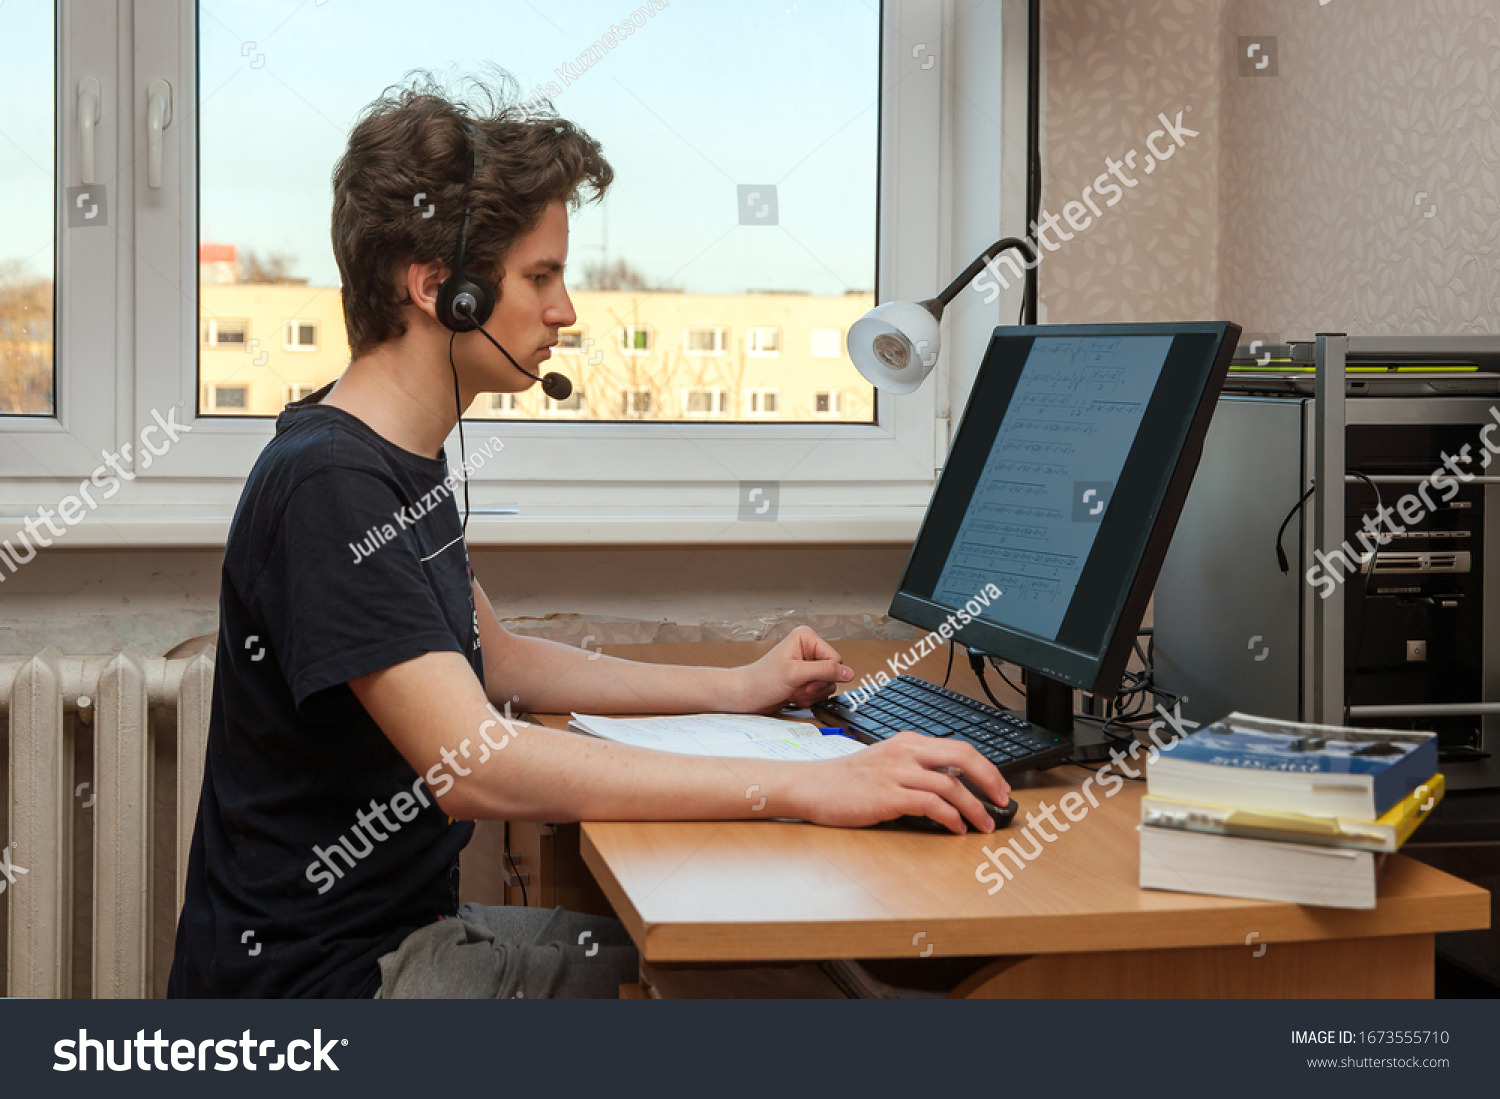 A caucasian teenager studies at home using a PC and headset #1673555710